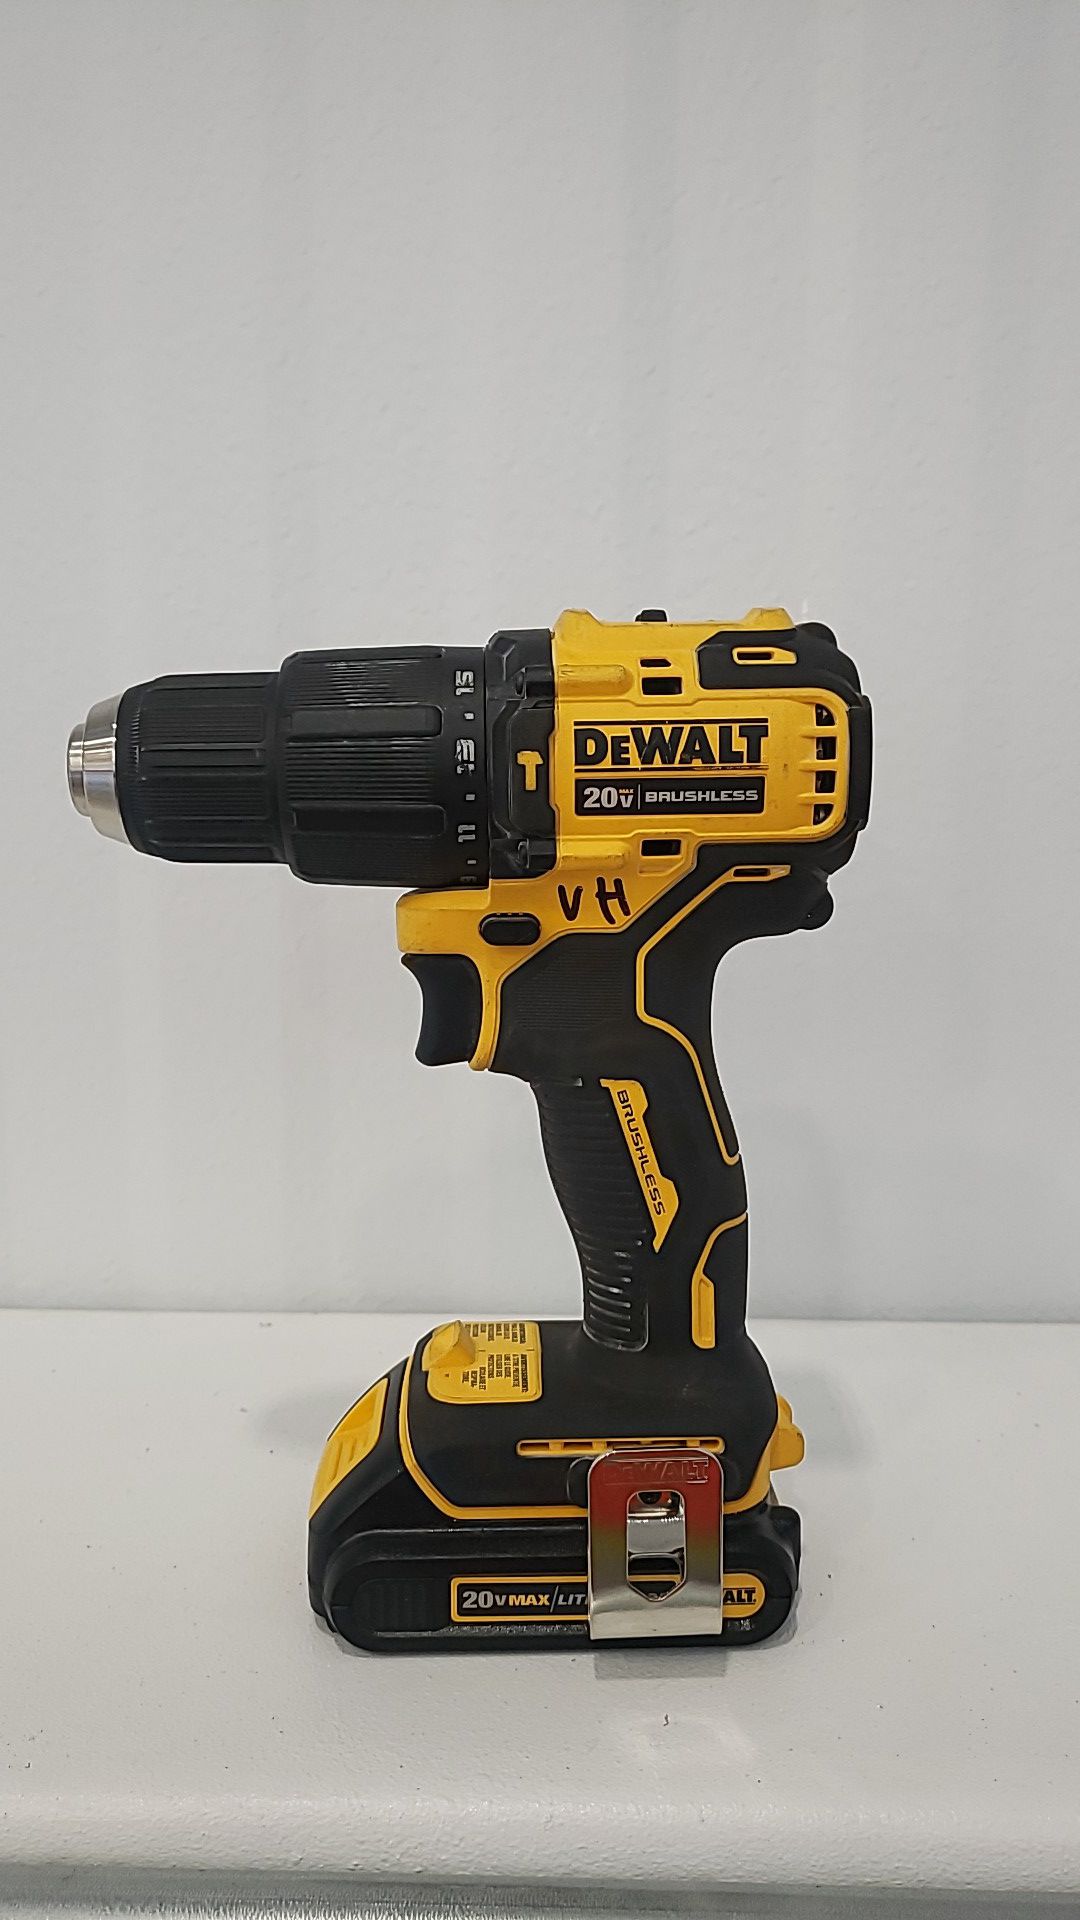 Hammer drill like new comes with dewalt bag